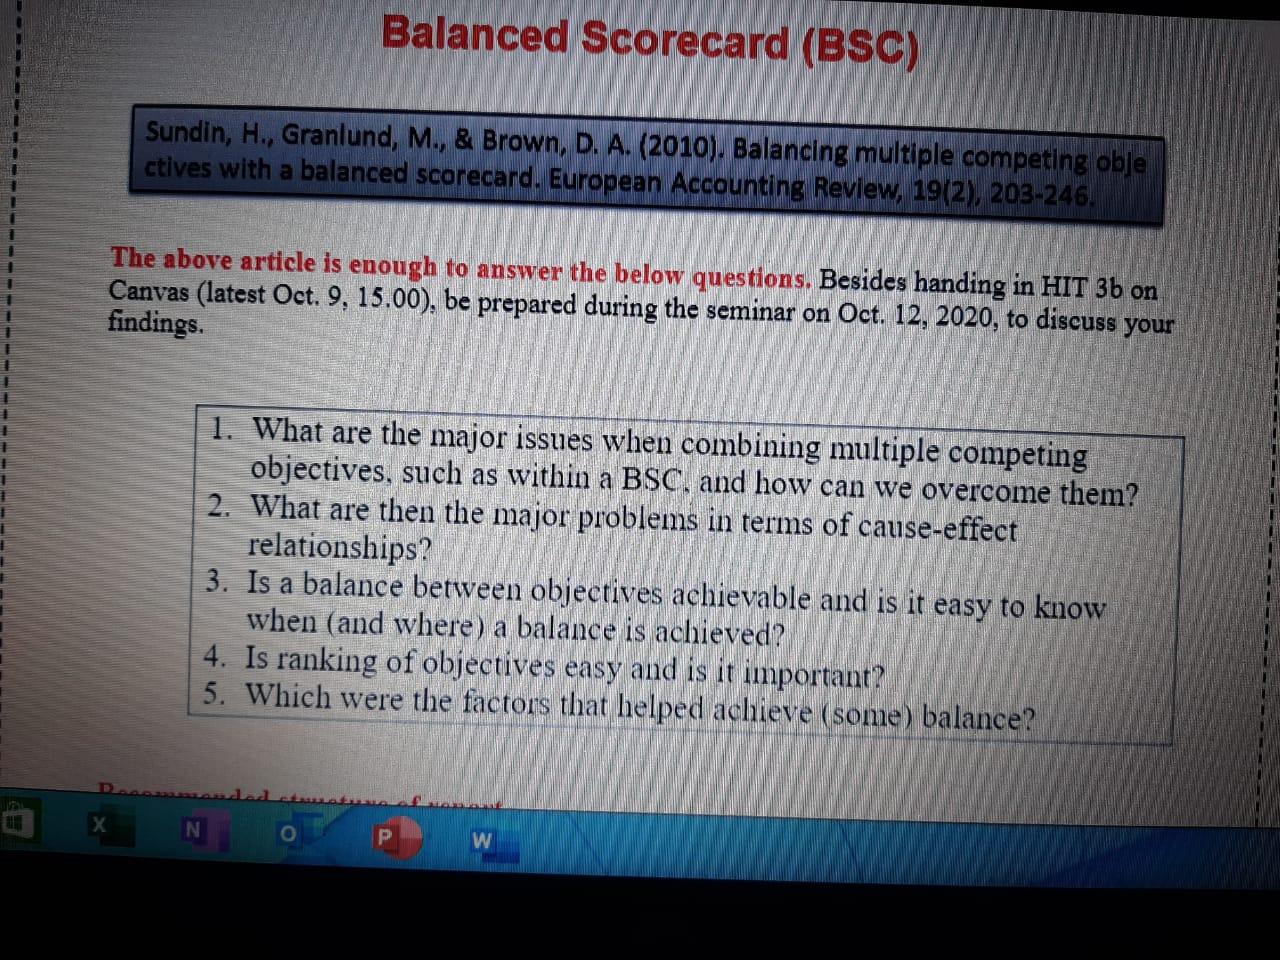 Balanced Scorecard (BSC) Sundin, H., Granlund, M., & Brown, D. A. (2010). Balancing multiple competing obje ctives with a bal